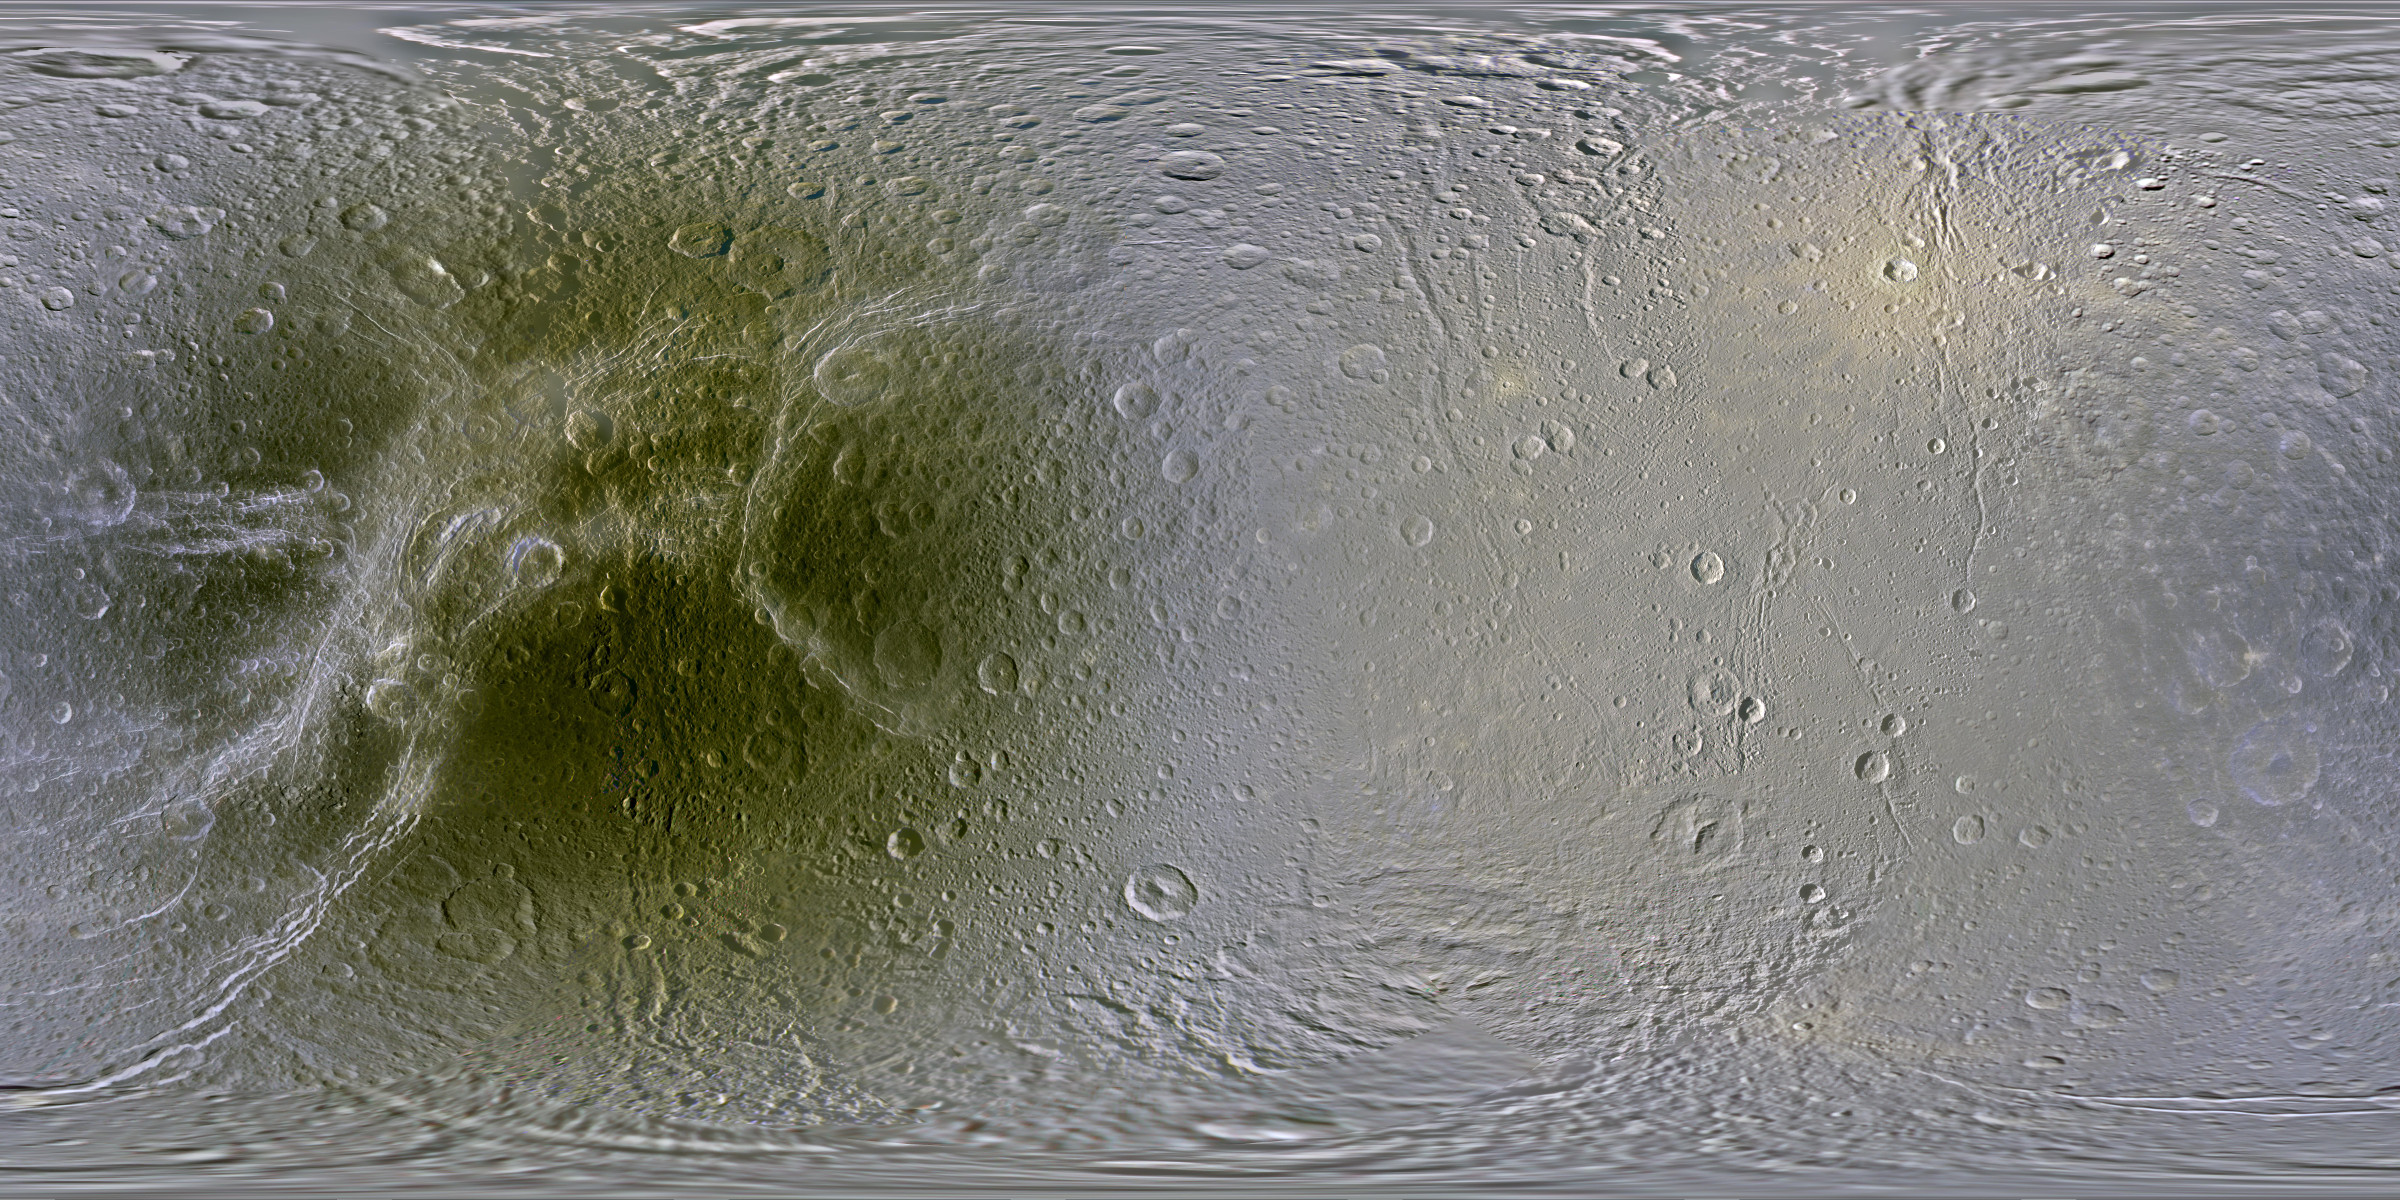 The Map of Dione